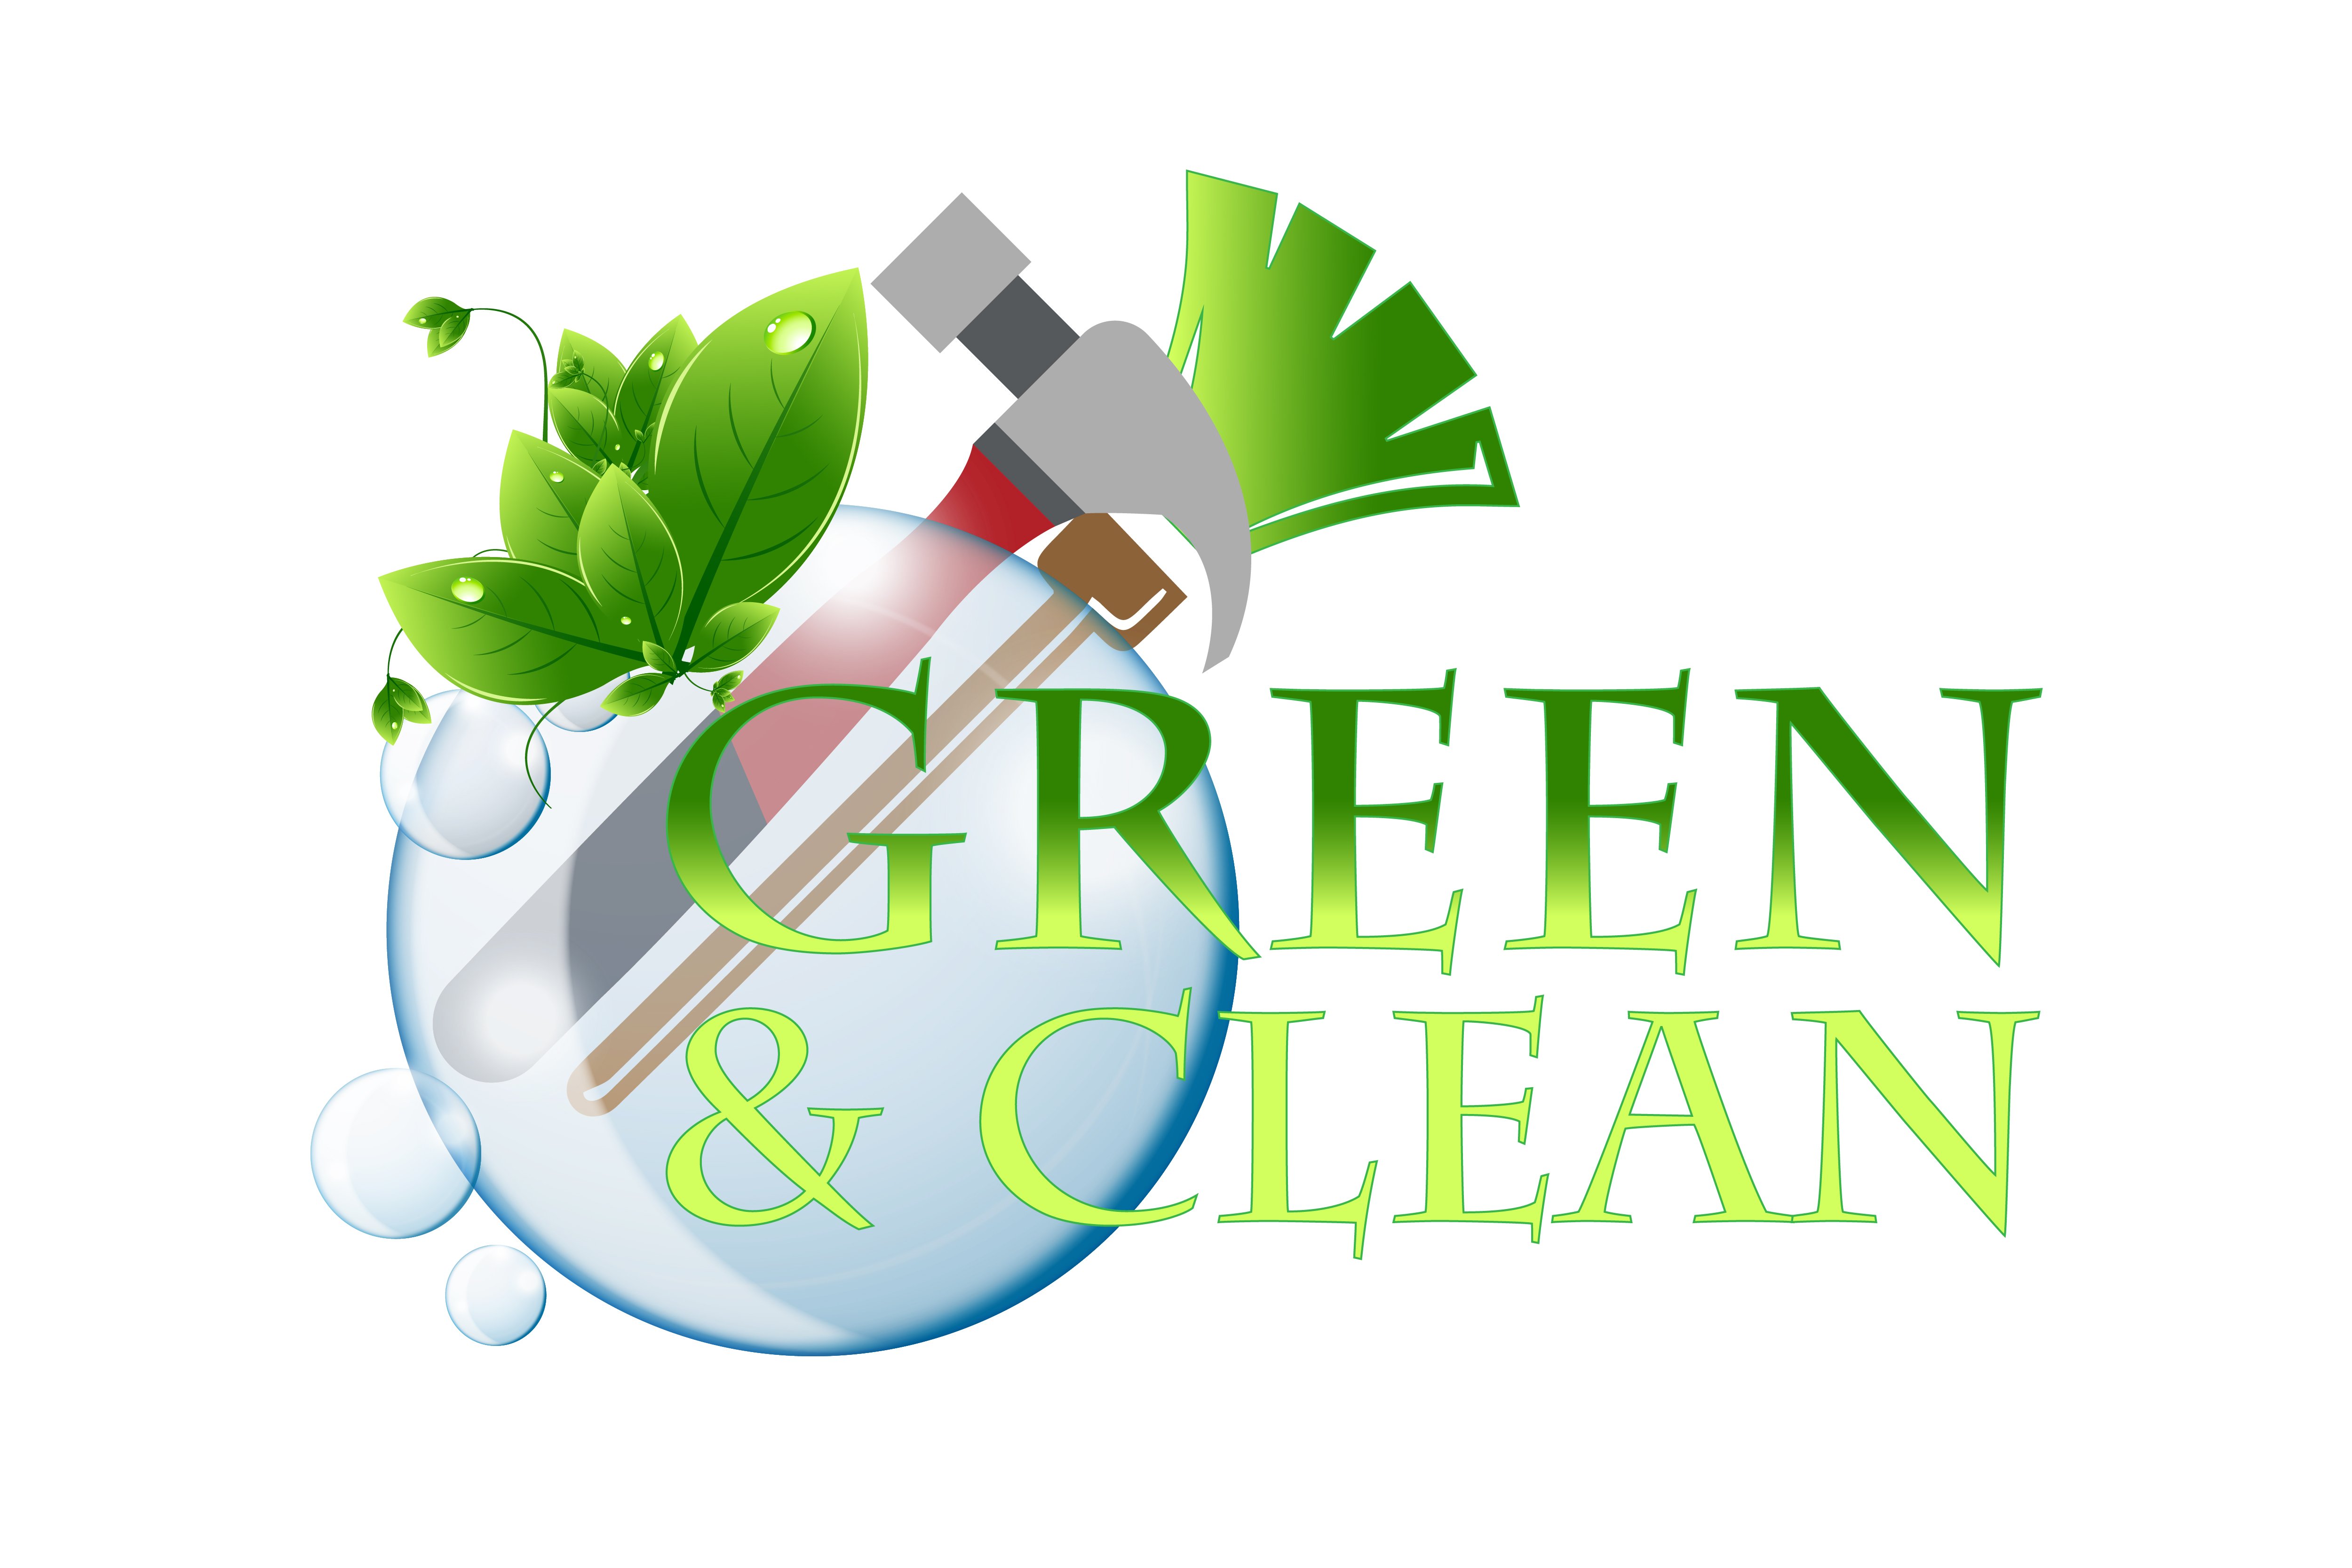 Green and Clean Home Services Logo